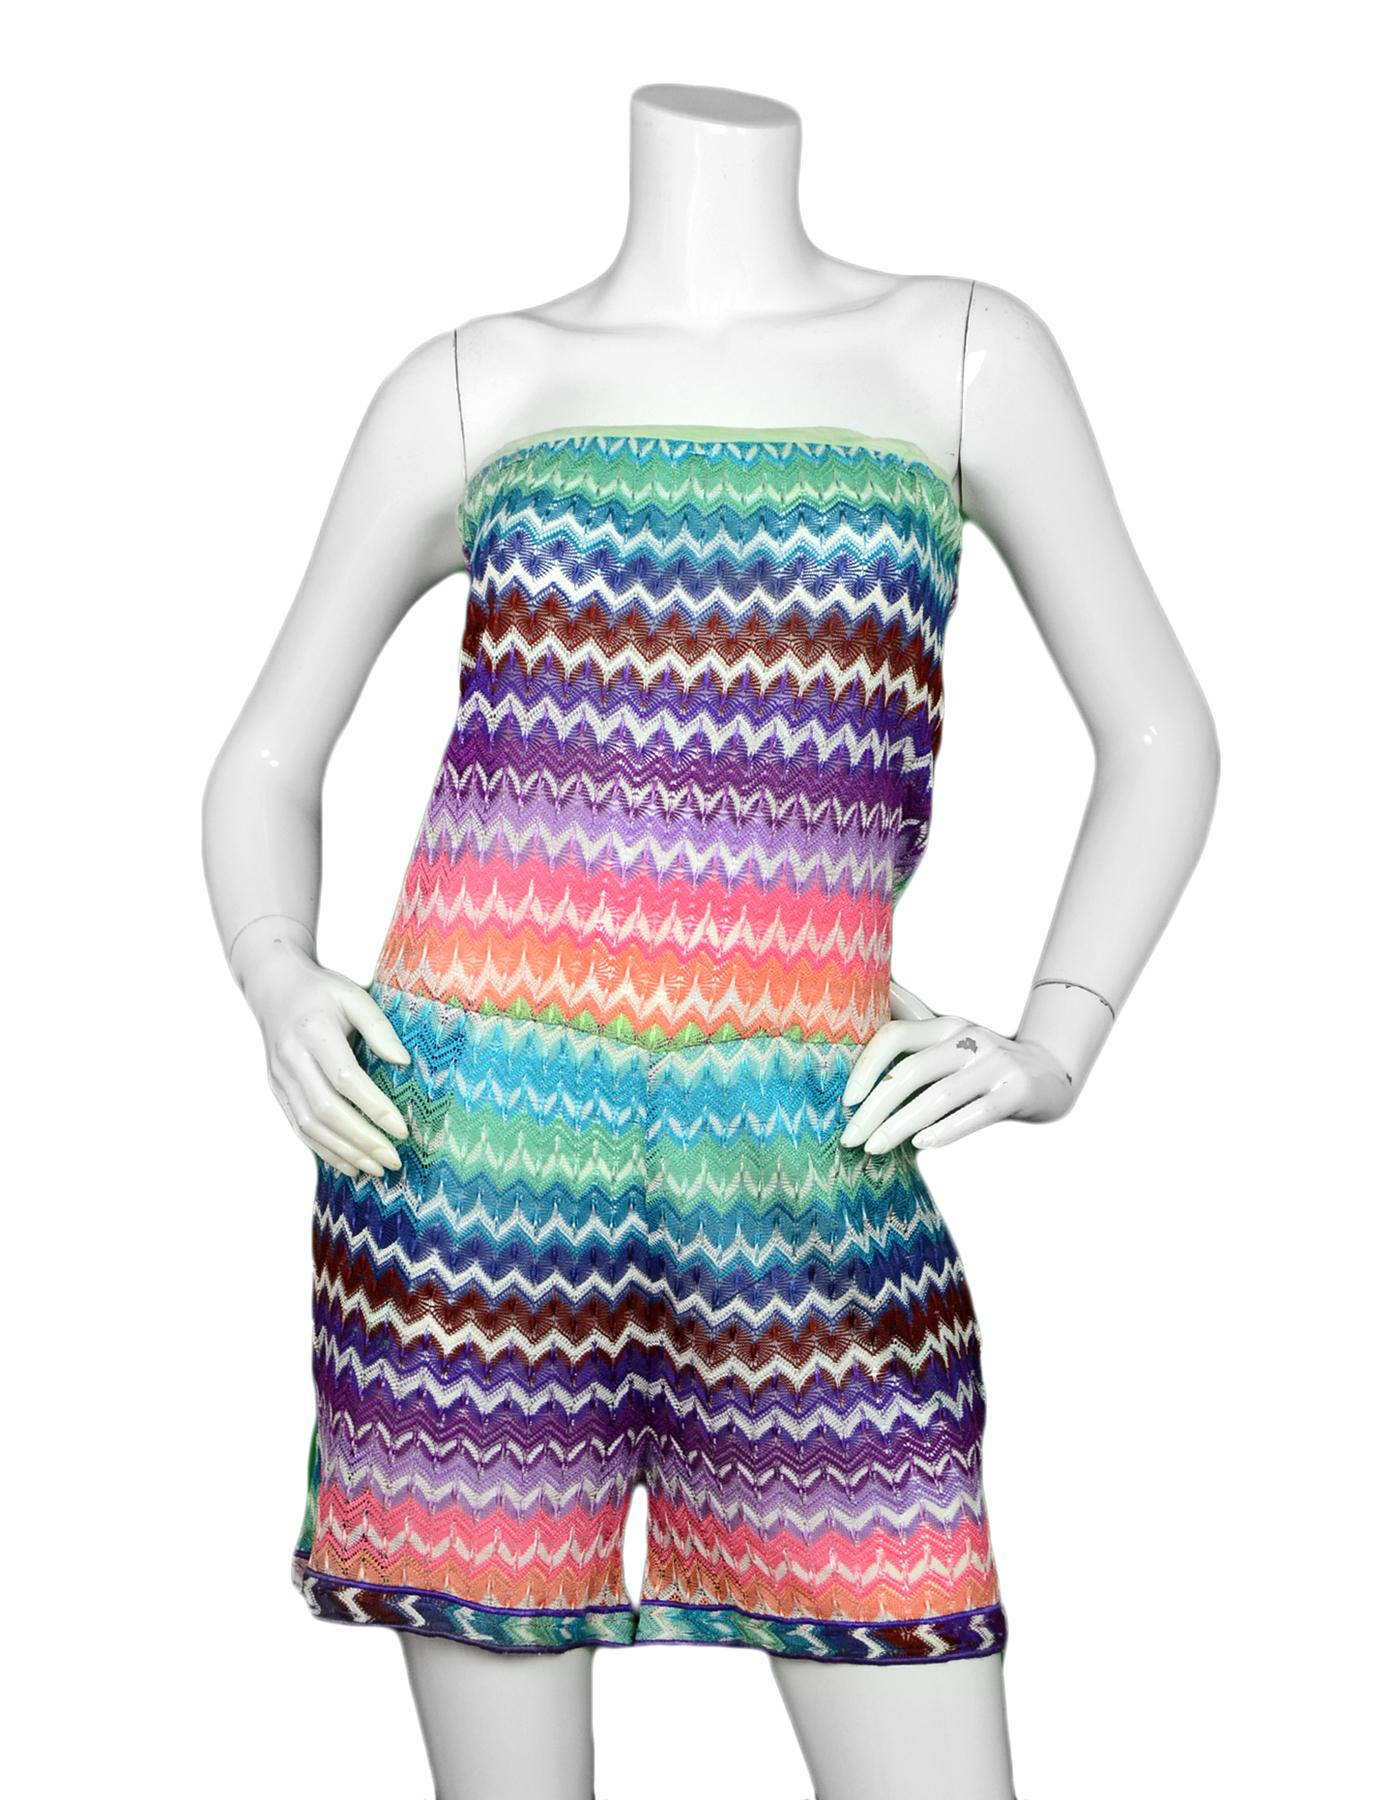 Missoni Mare Multicolor Chevron Knit Romper sz 42

Made In: Italy
Color: Multicolor
Materials: 100% rayon
Opening/Closure:  Pullover
Overall Condition: Very good pre-owned condition, with light wear throughout
Tag Size: IT42 / US6
Bust: 32